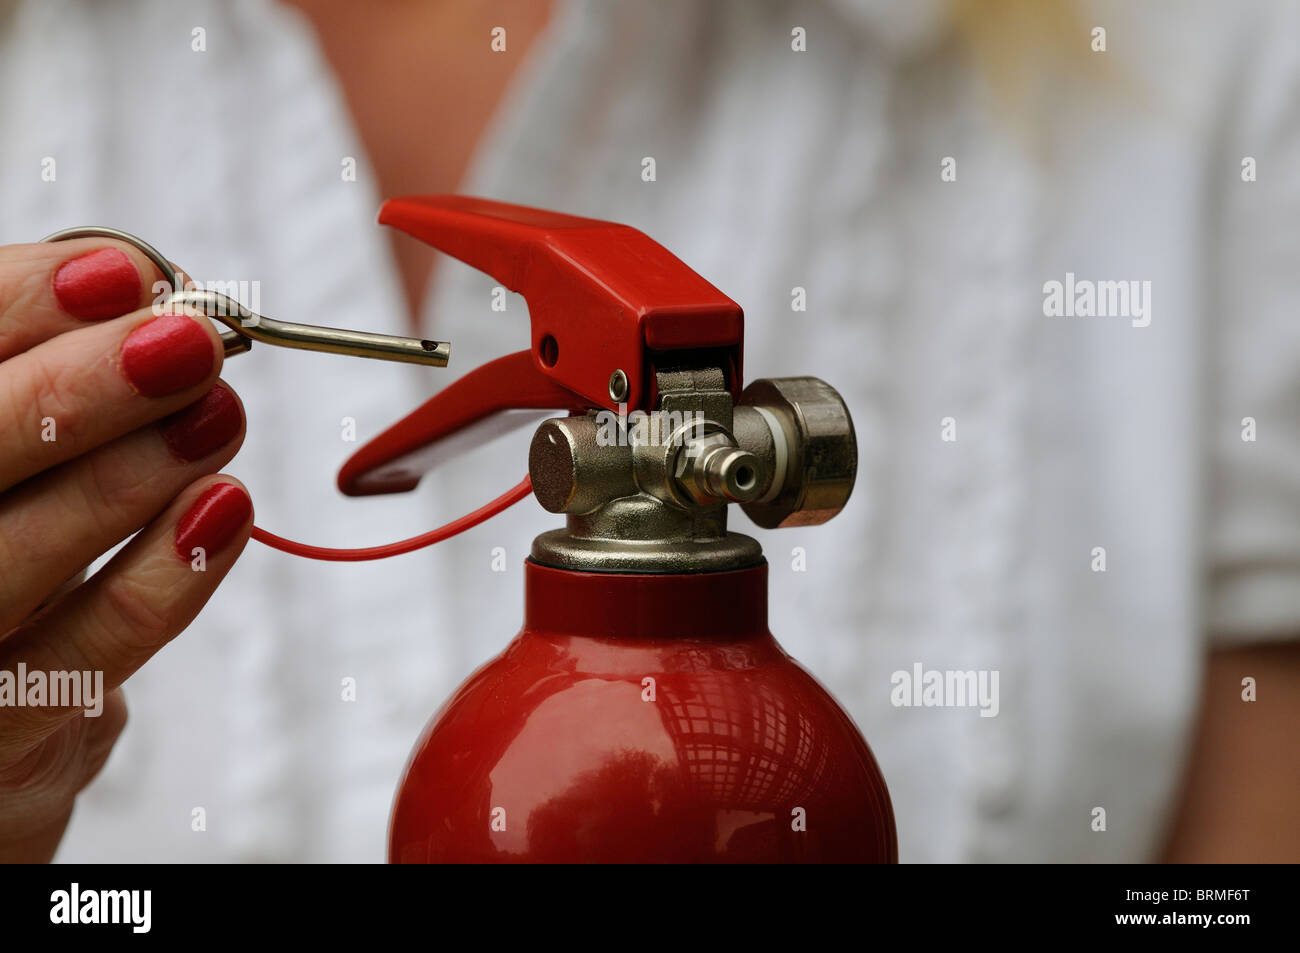 Removing the metal safety pin from a fire extinguisher Stock Photo - Alamy